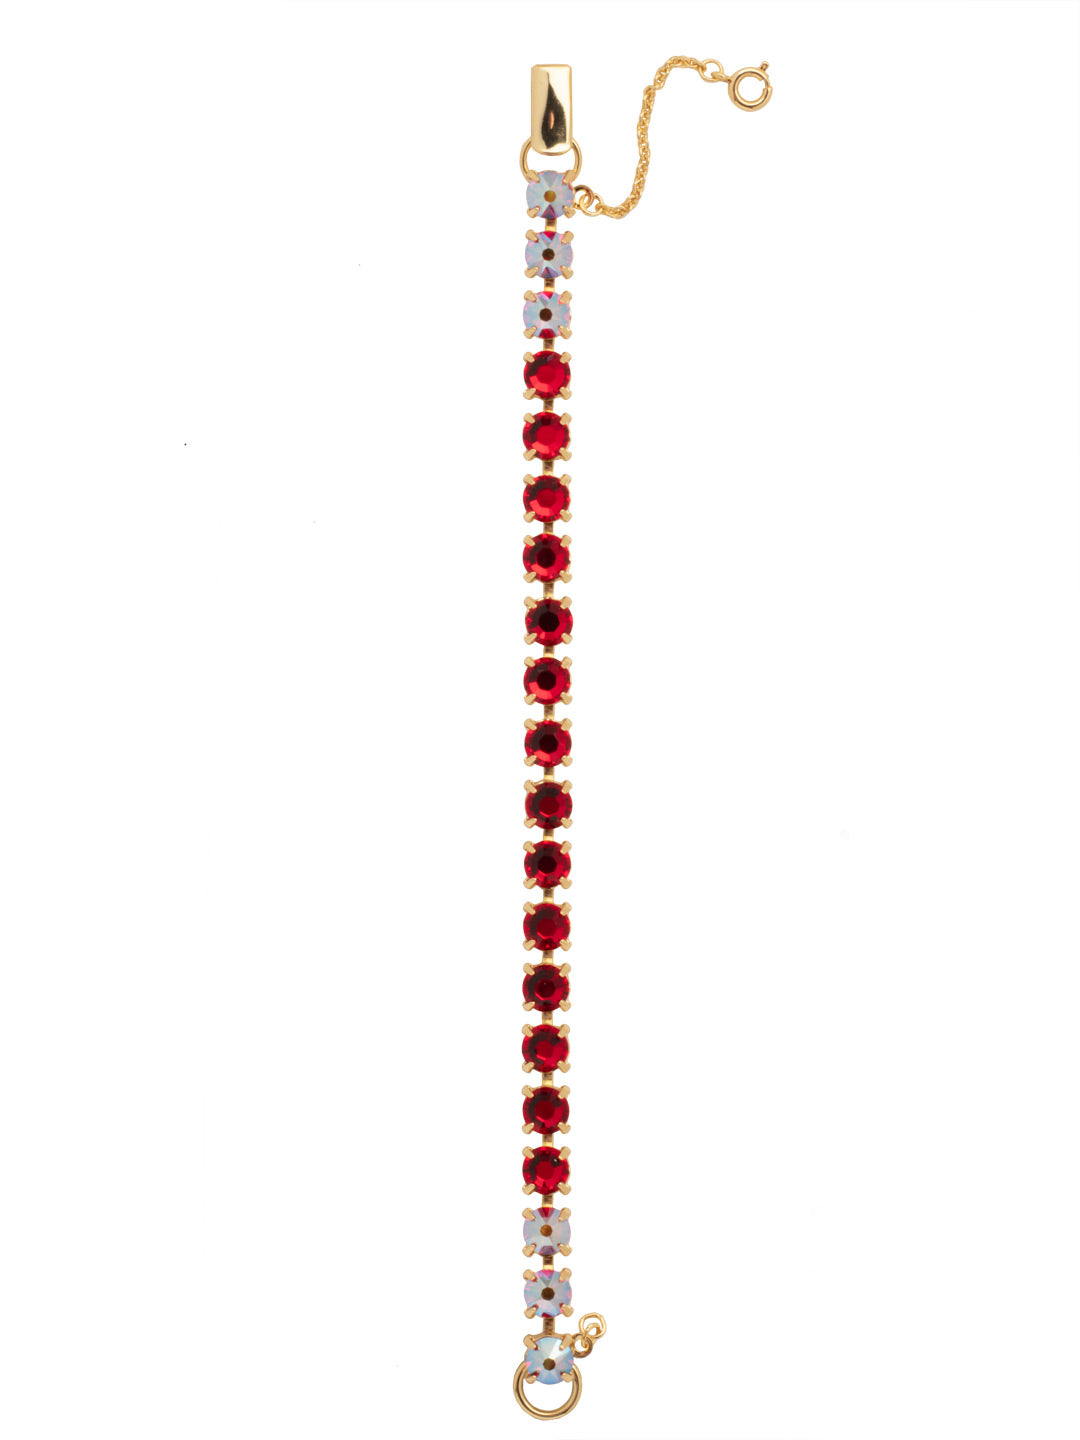 Elsie Tennis Bracelet - BEZ30BGCB - <p>The Elsie Tennis Bracelet is a classic style that can be worn everywhere. A line of round cut crystals wraps around the full length of the bracelet and secures with a fold-over clasp. From Sorrelli's Cranberry collection in our Bright Gold-tone finish.</p>